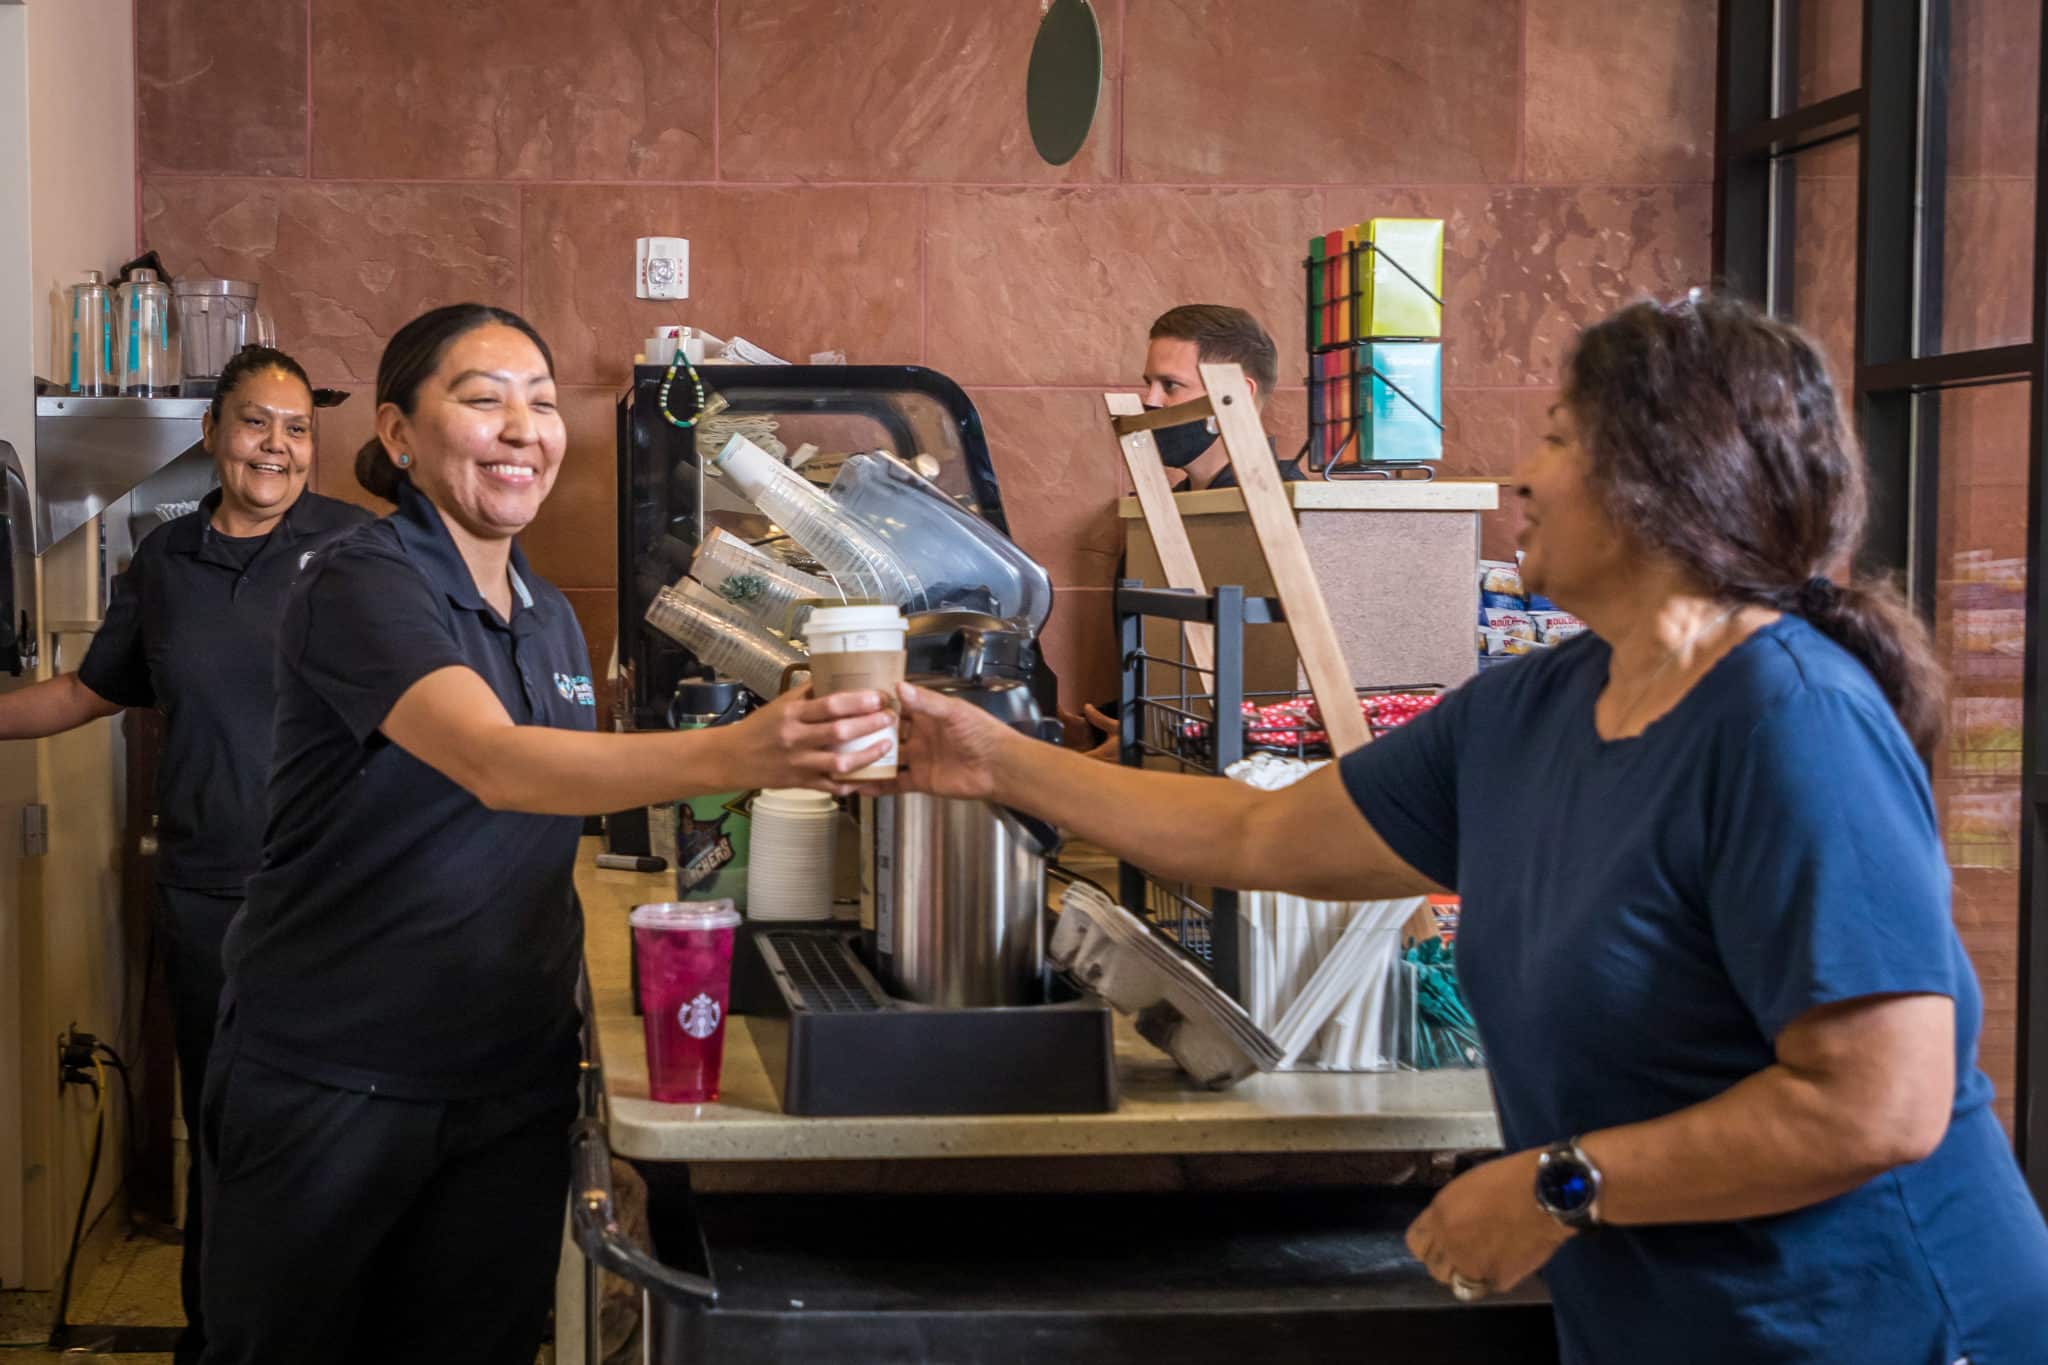 A nurse getting coffee from the Starbucks Barista